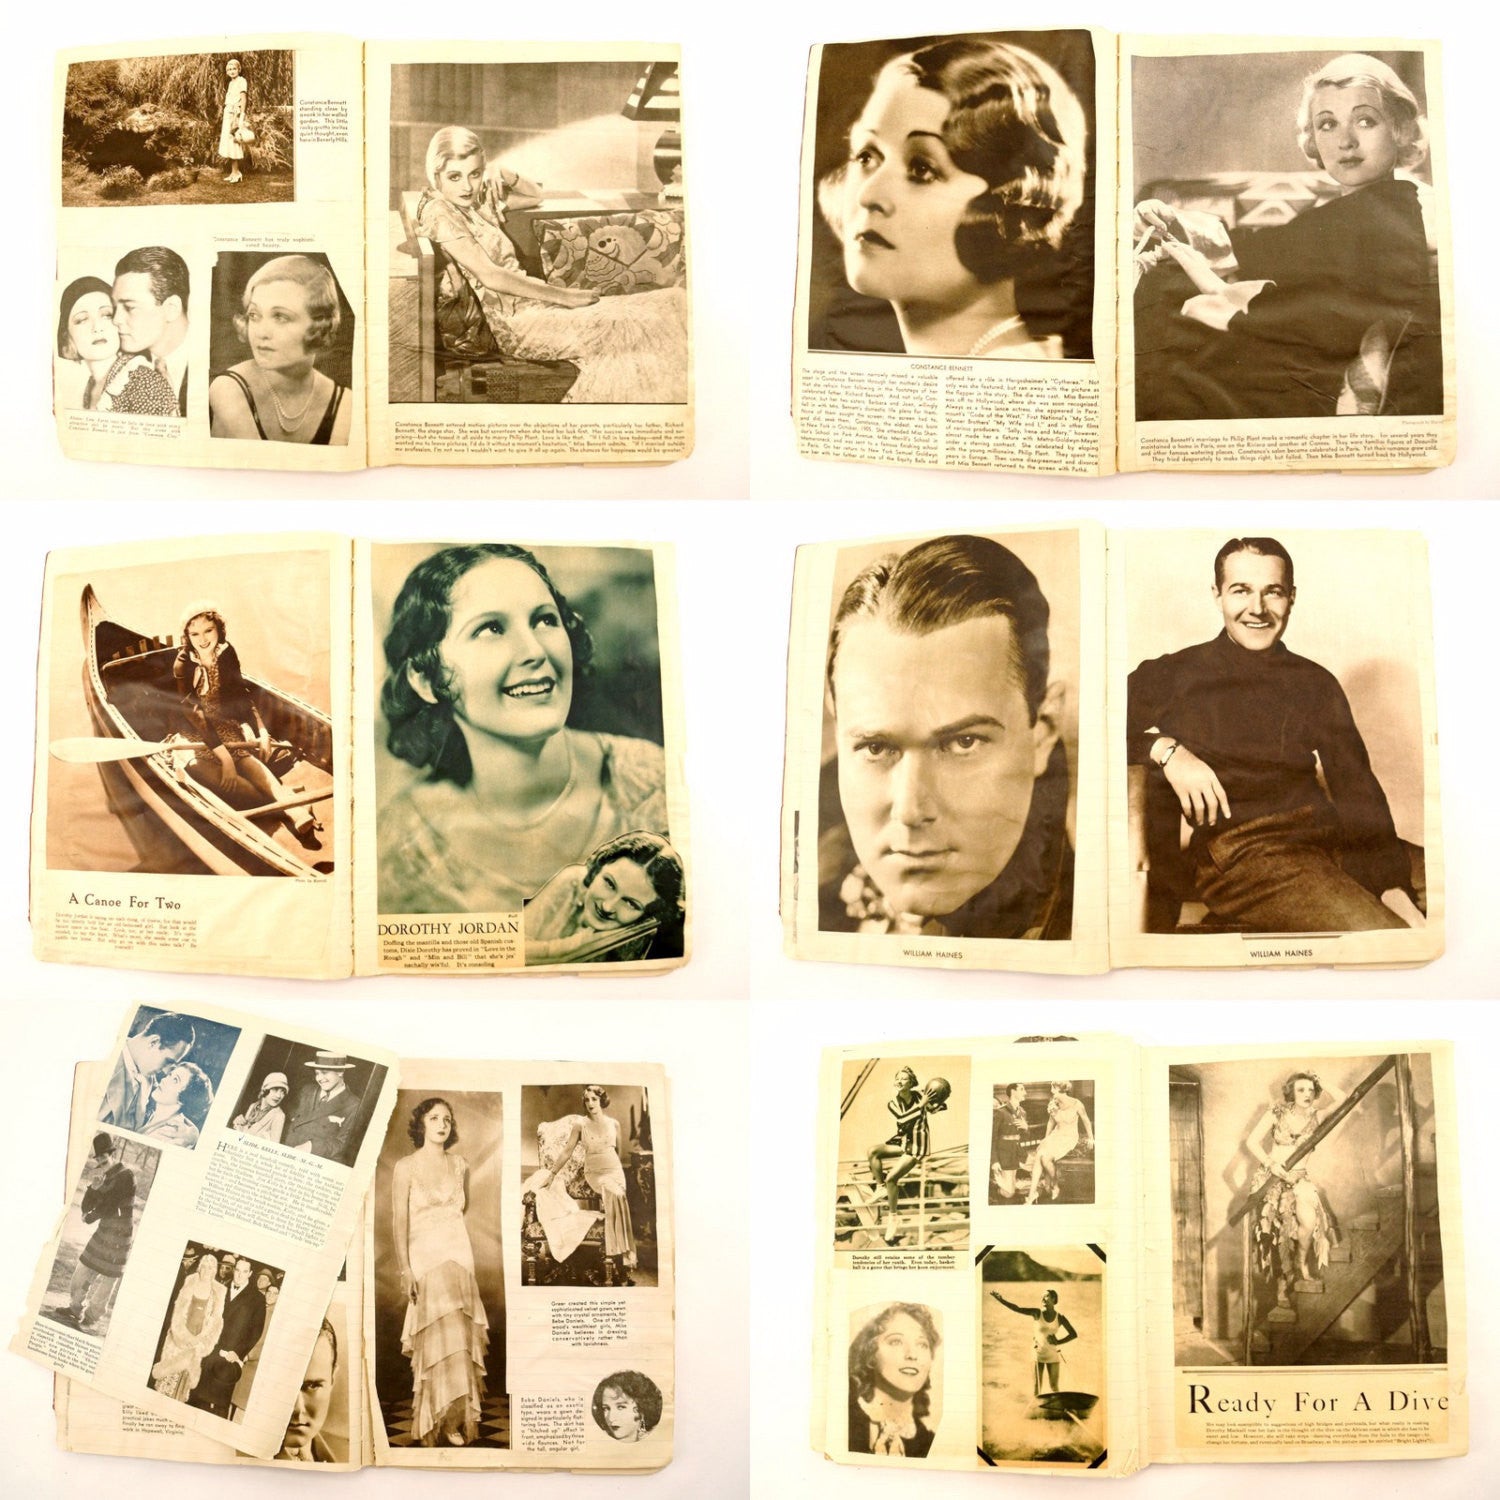 Vintage Scrapbook Notebook with Movie Star Photo Clippings (c.1920-30s –